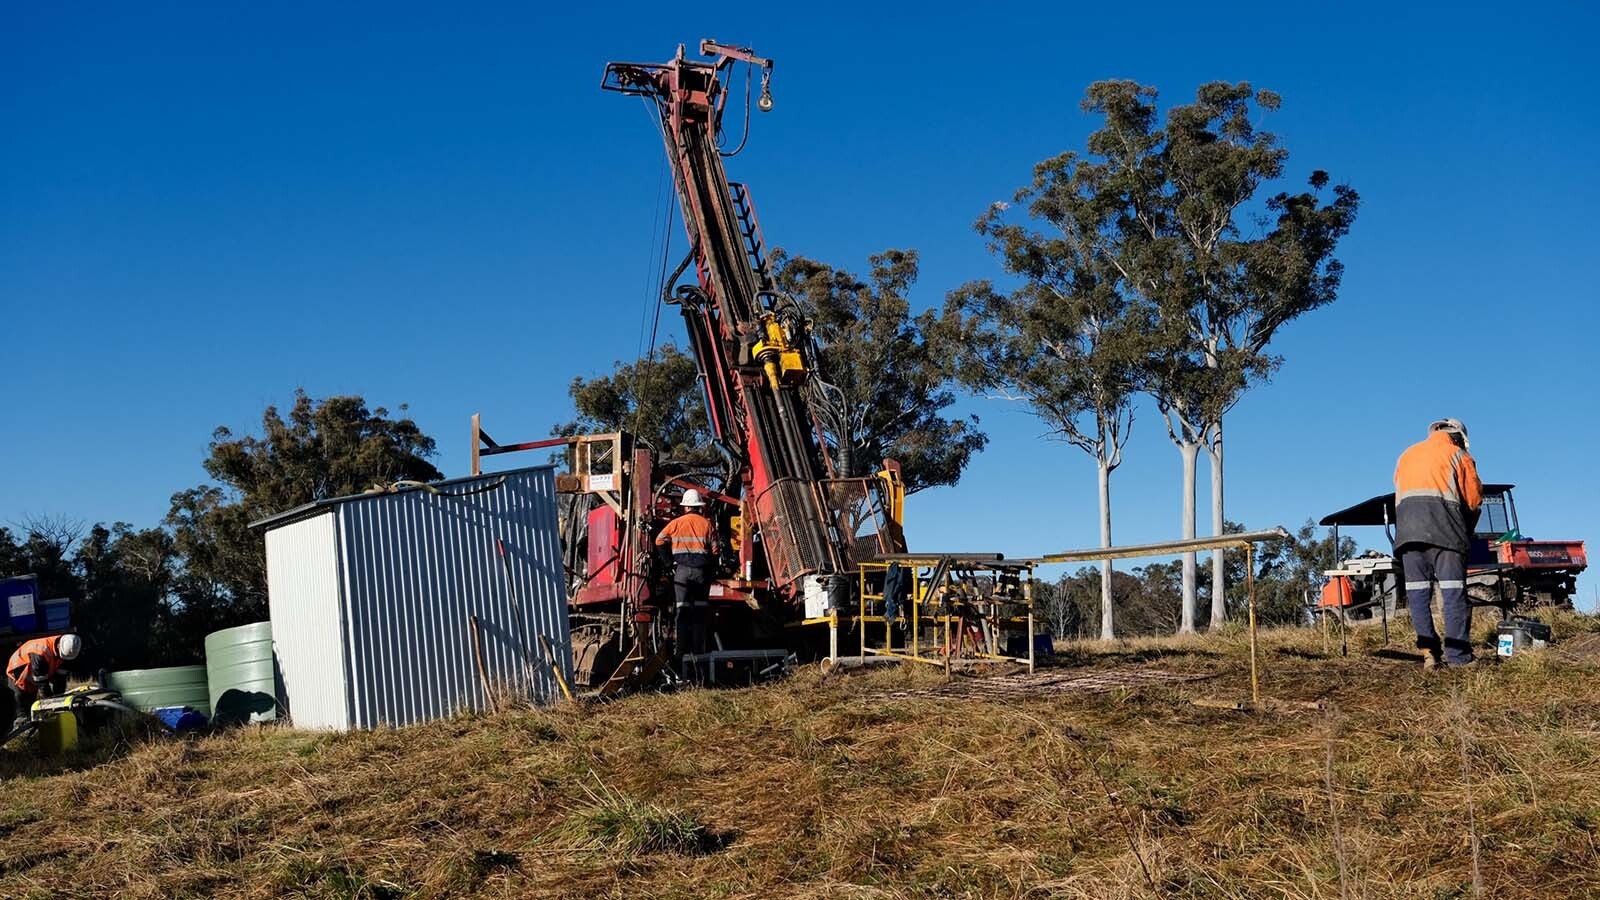 Global Uranium Corp. is expanding to Wyoming to take advantage of a uranium boom. The company is seen here drilling at its Enmore Gold Project in Australia in 2022.